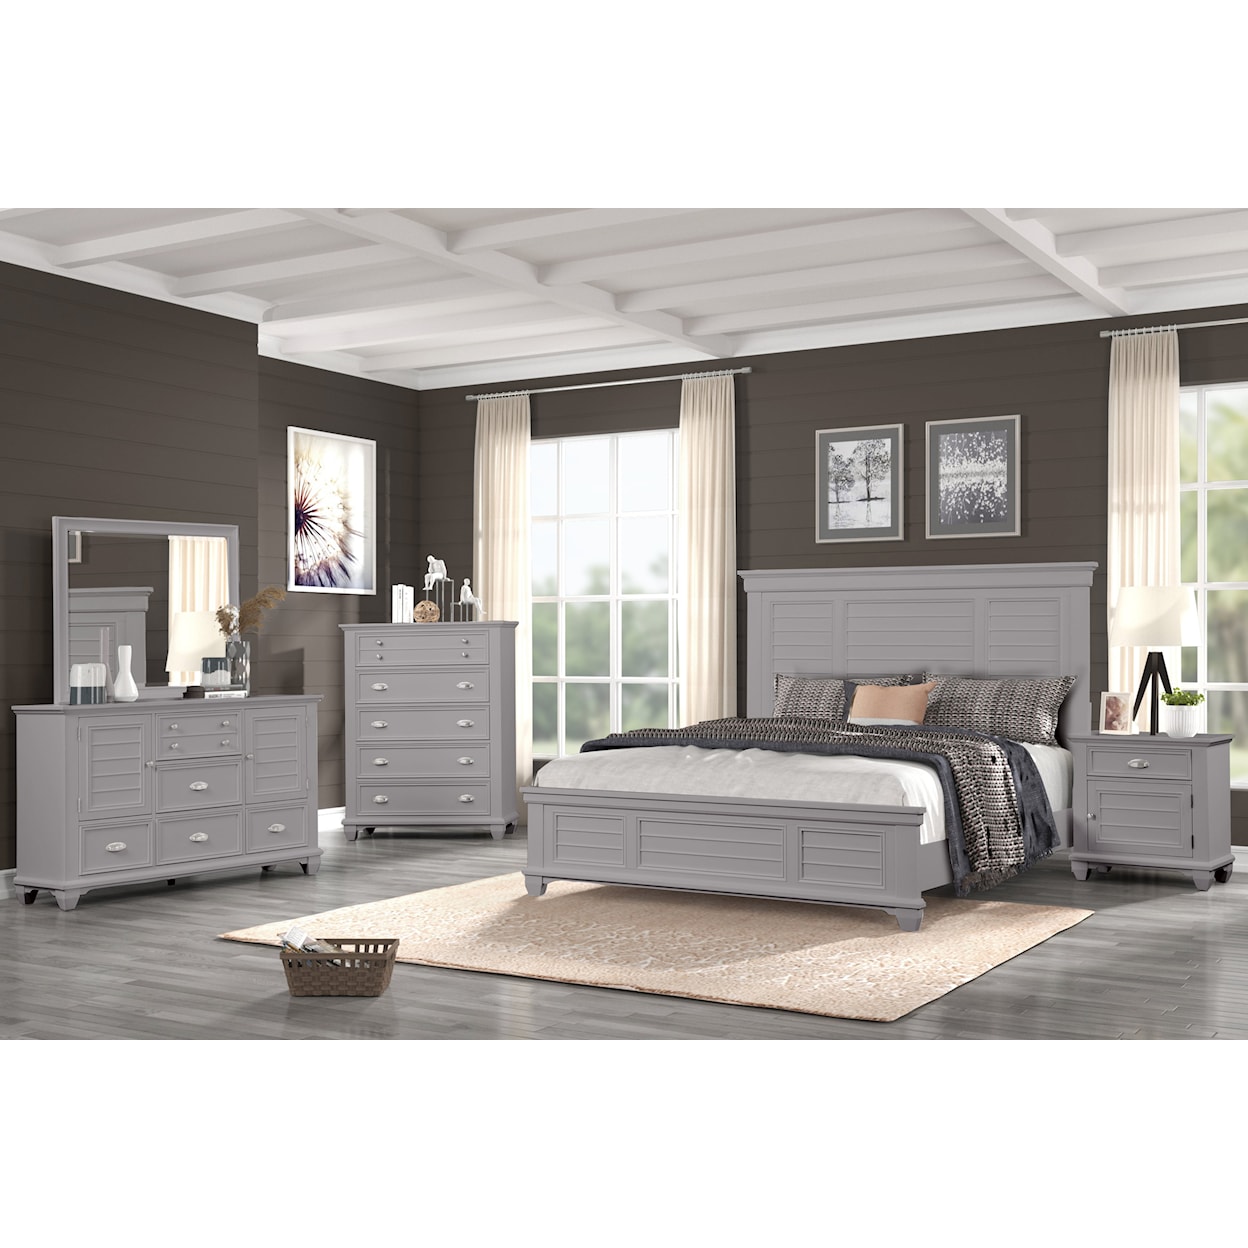 New Classic Jamestown Panel King Bed